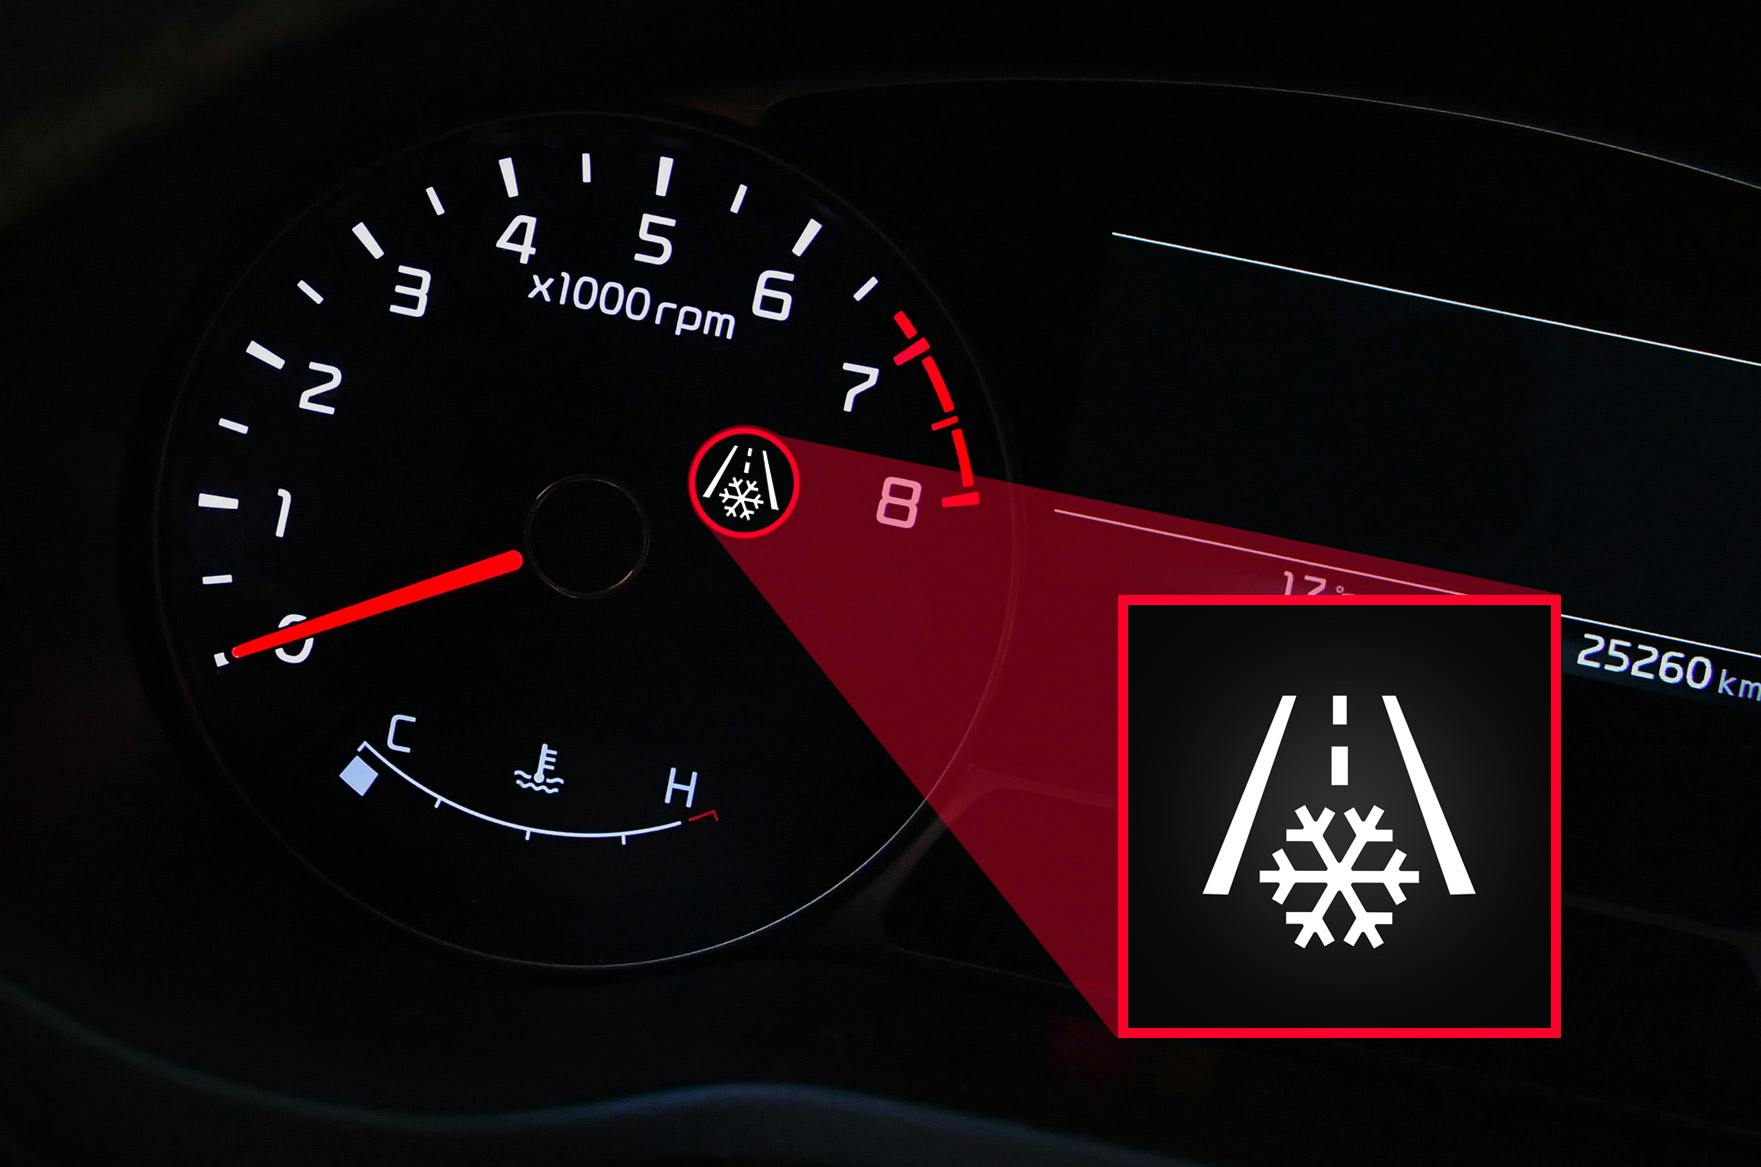 Low outside temperature warning light on dashboard